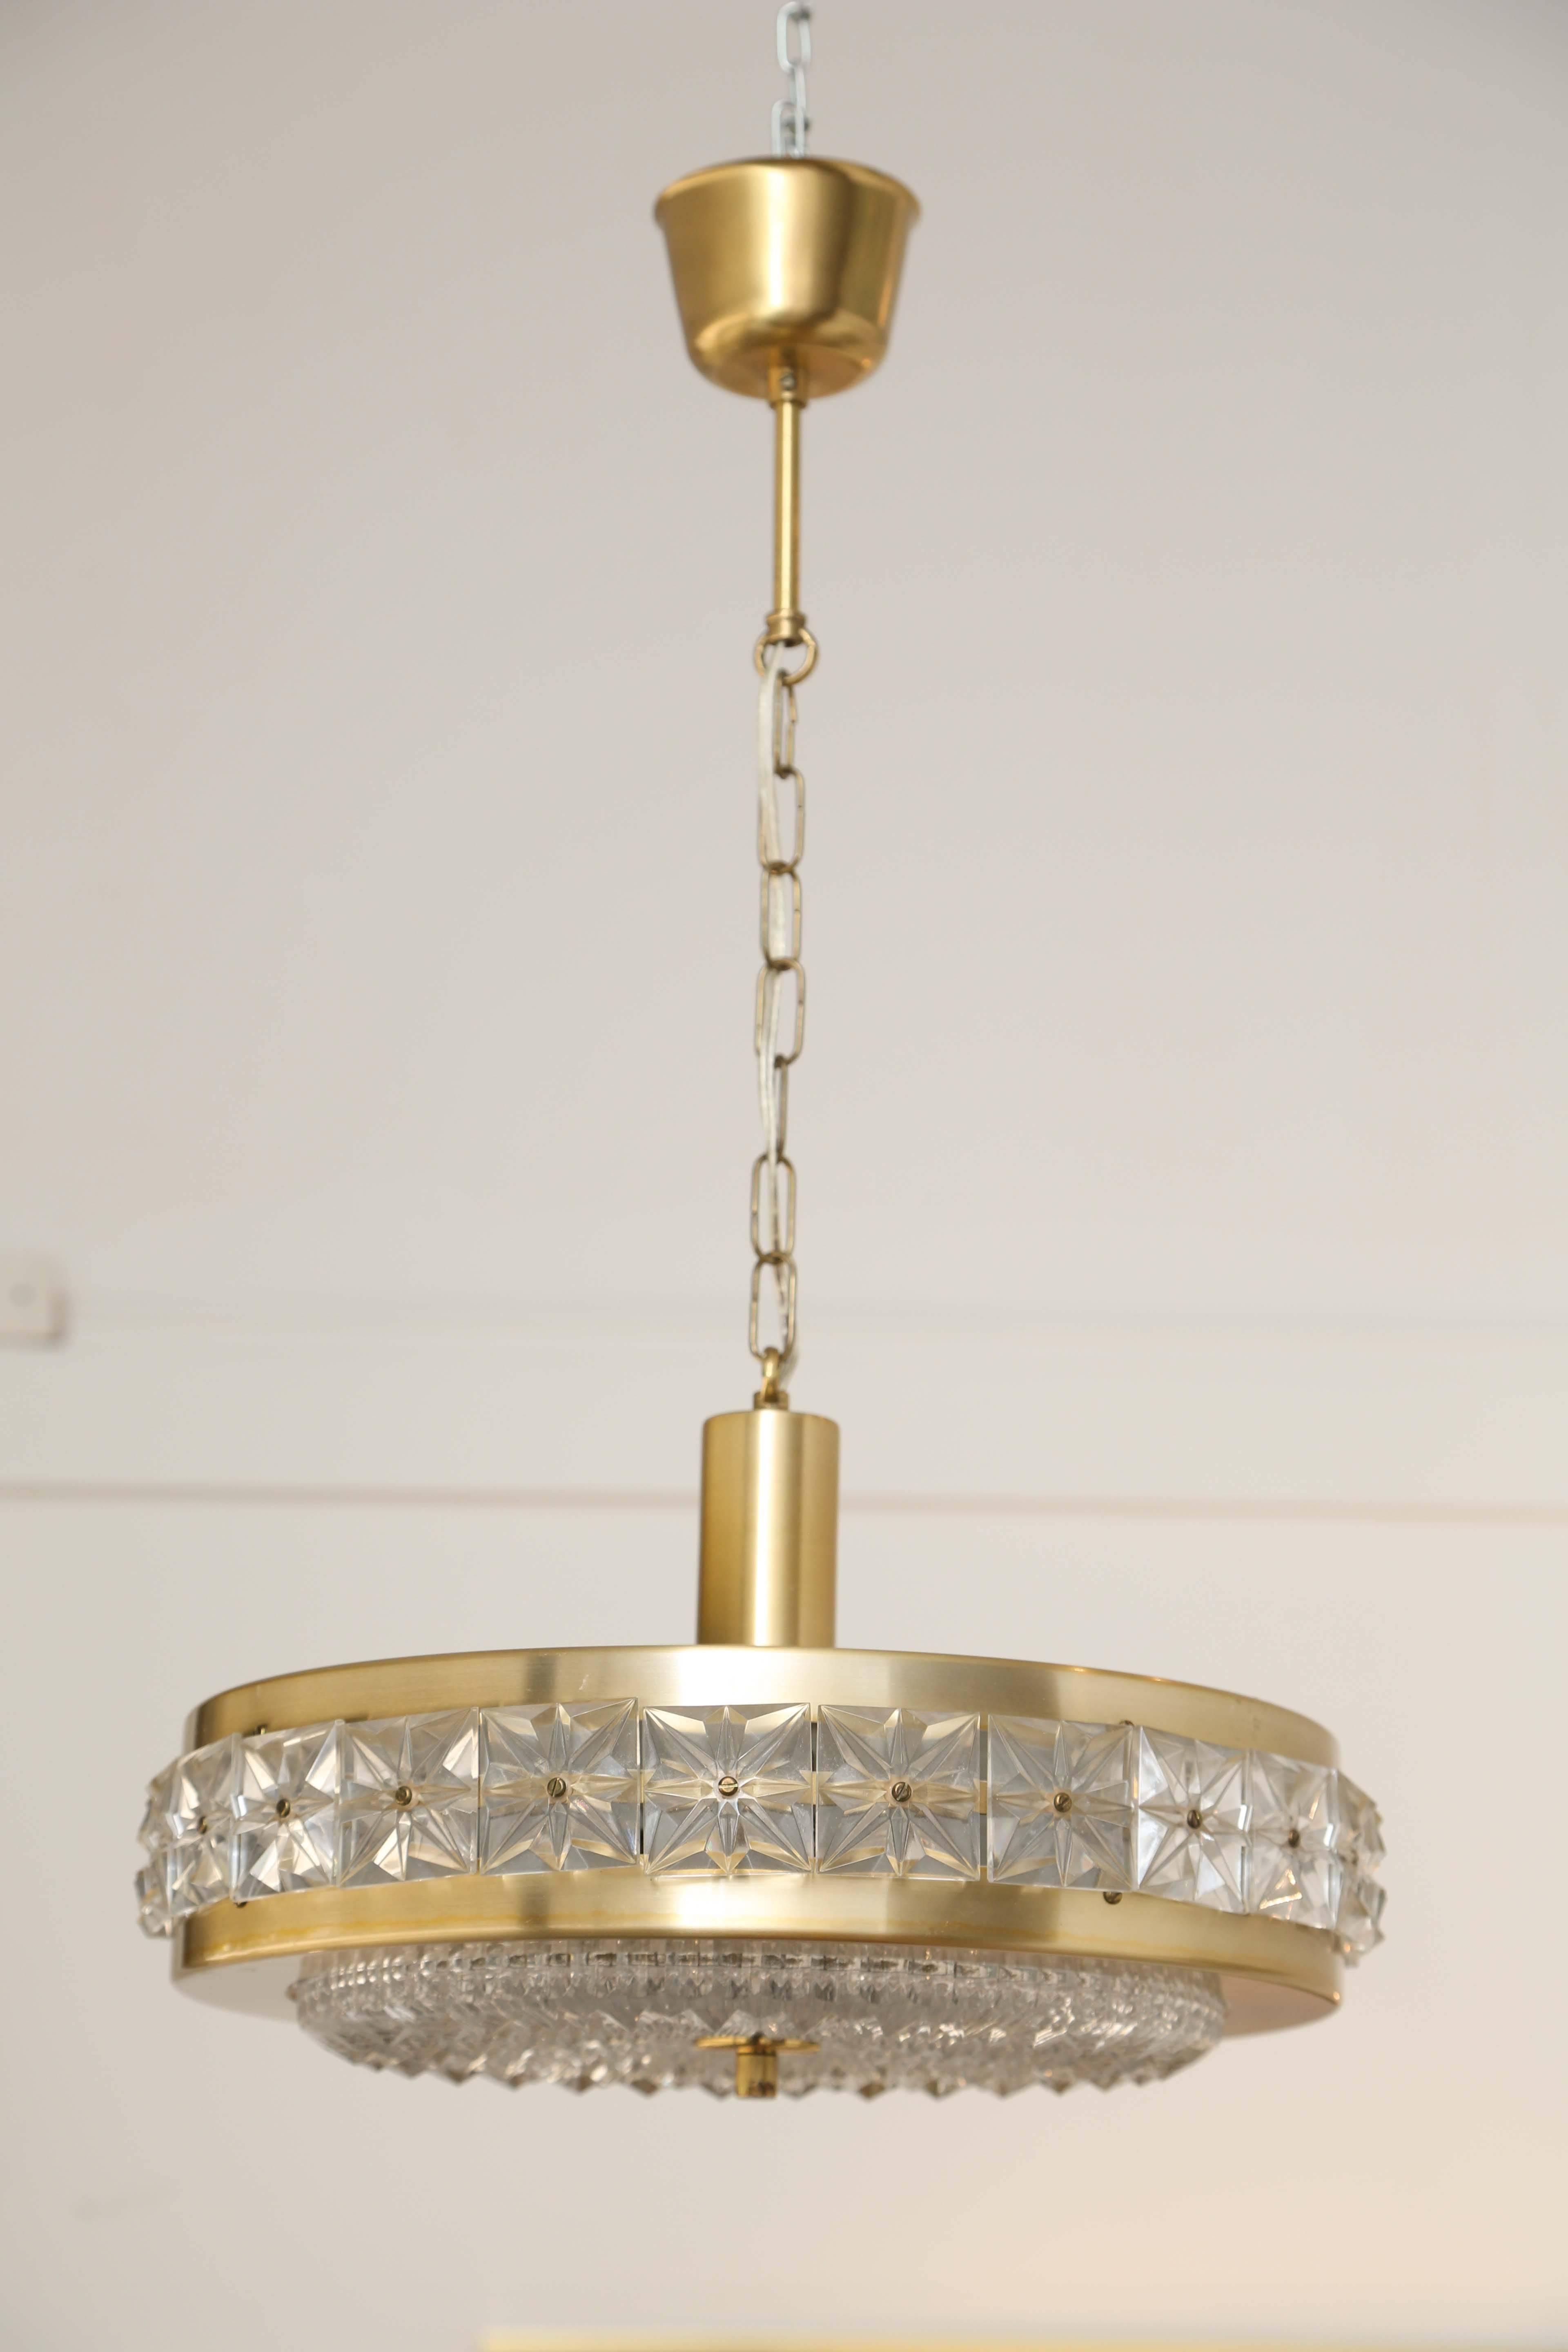 Carl Fagerlund for Orrefors brass and crystal pendant for Orrefors.
The bottom has cut crystal shade and square crystal discs around the brass frame. Takes three candelabra bulbs. Vintage 1960-1970.
Has been rewired to US Standard.

Measures: